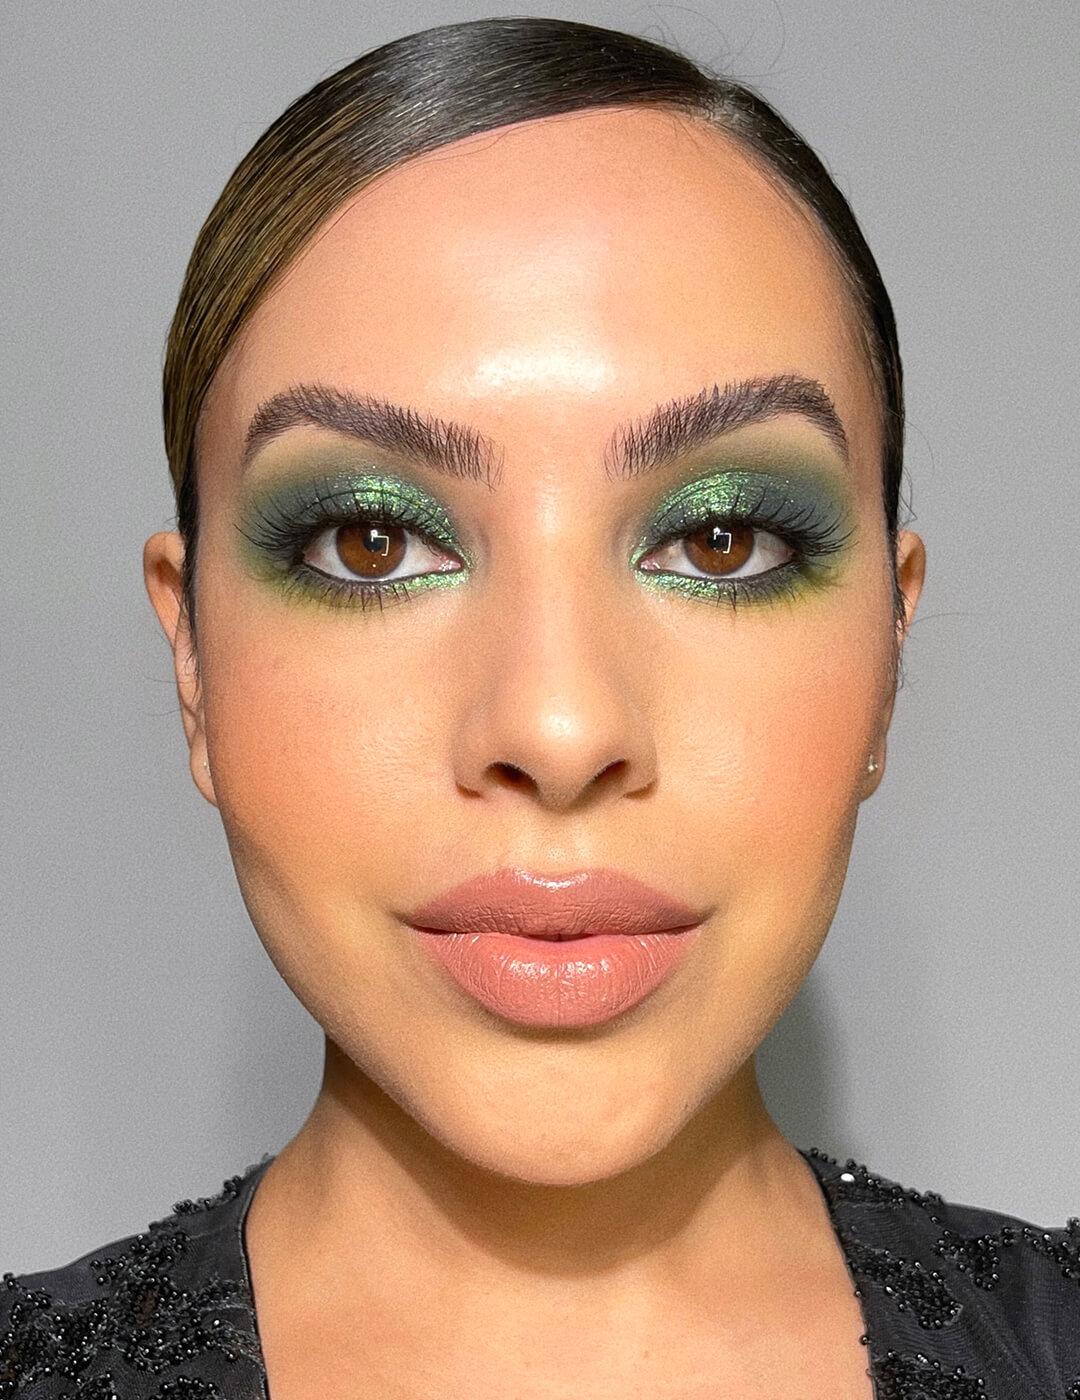 A close-up photo of a woman wearing green metallic eyeshadow with nude to pink lipstick